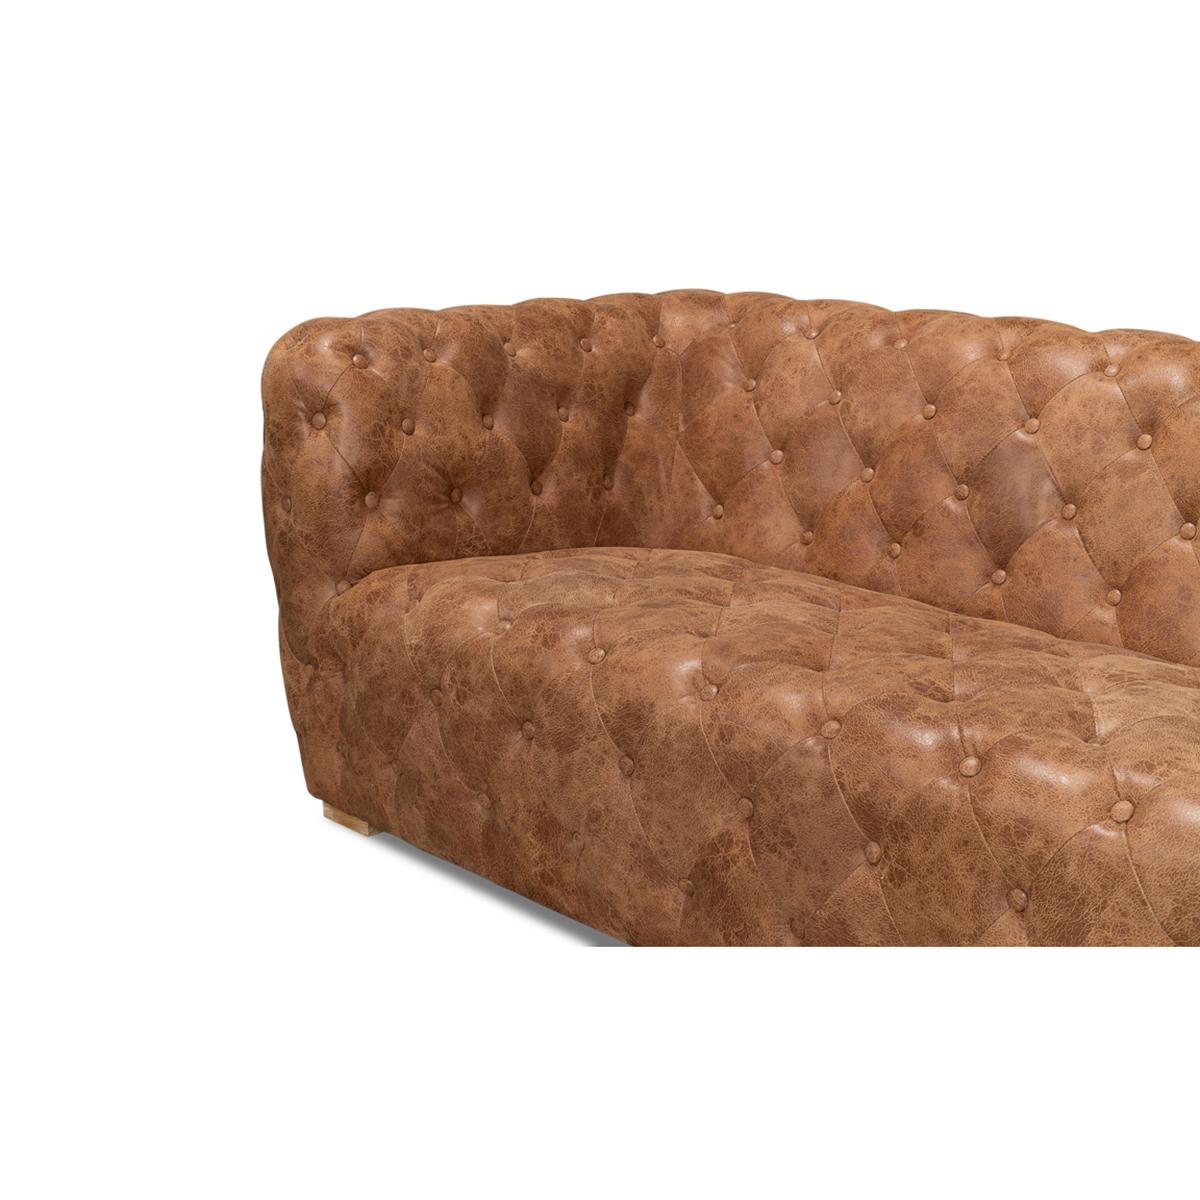 Modern Contemporary Tufted Leather Sofa For Sale